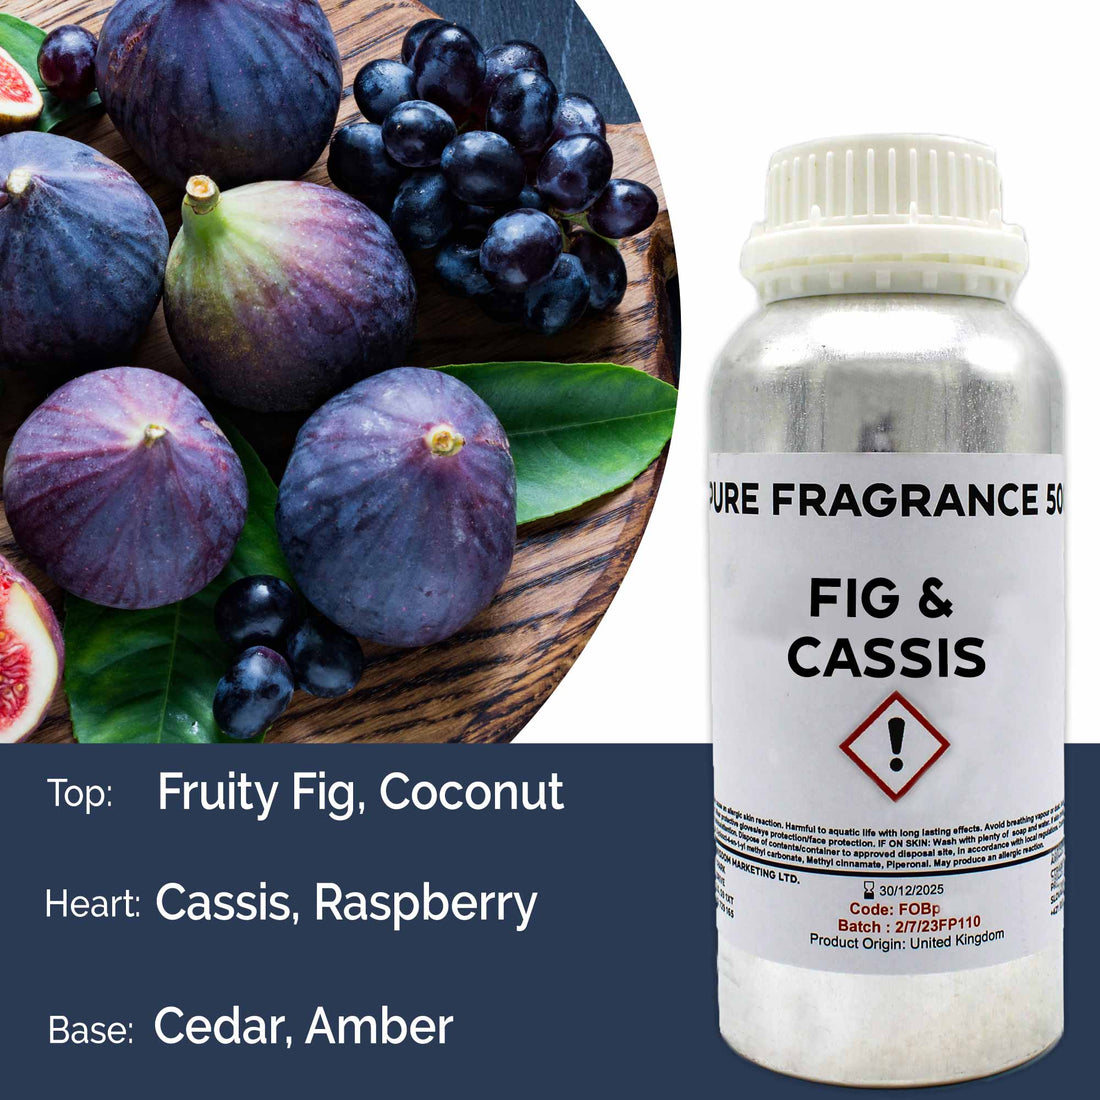 Fig & Casis Pure Fragrance Oil - 500ml